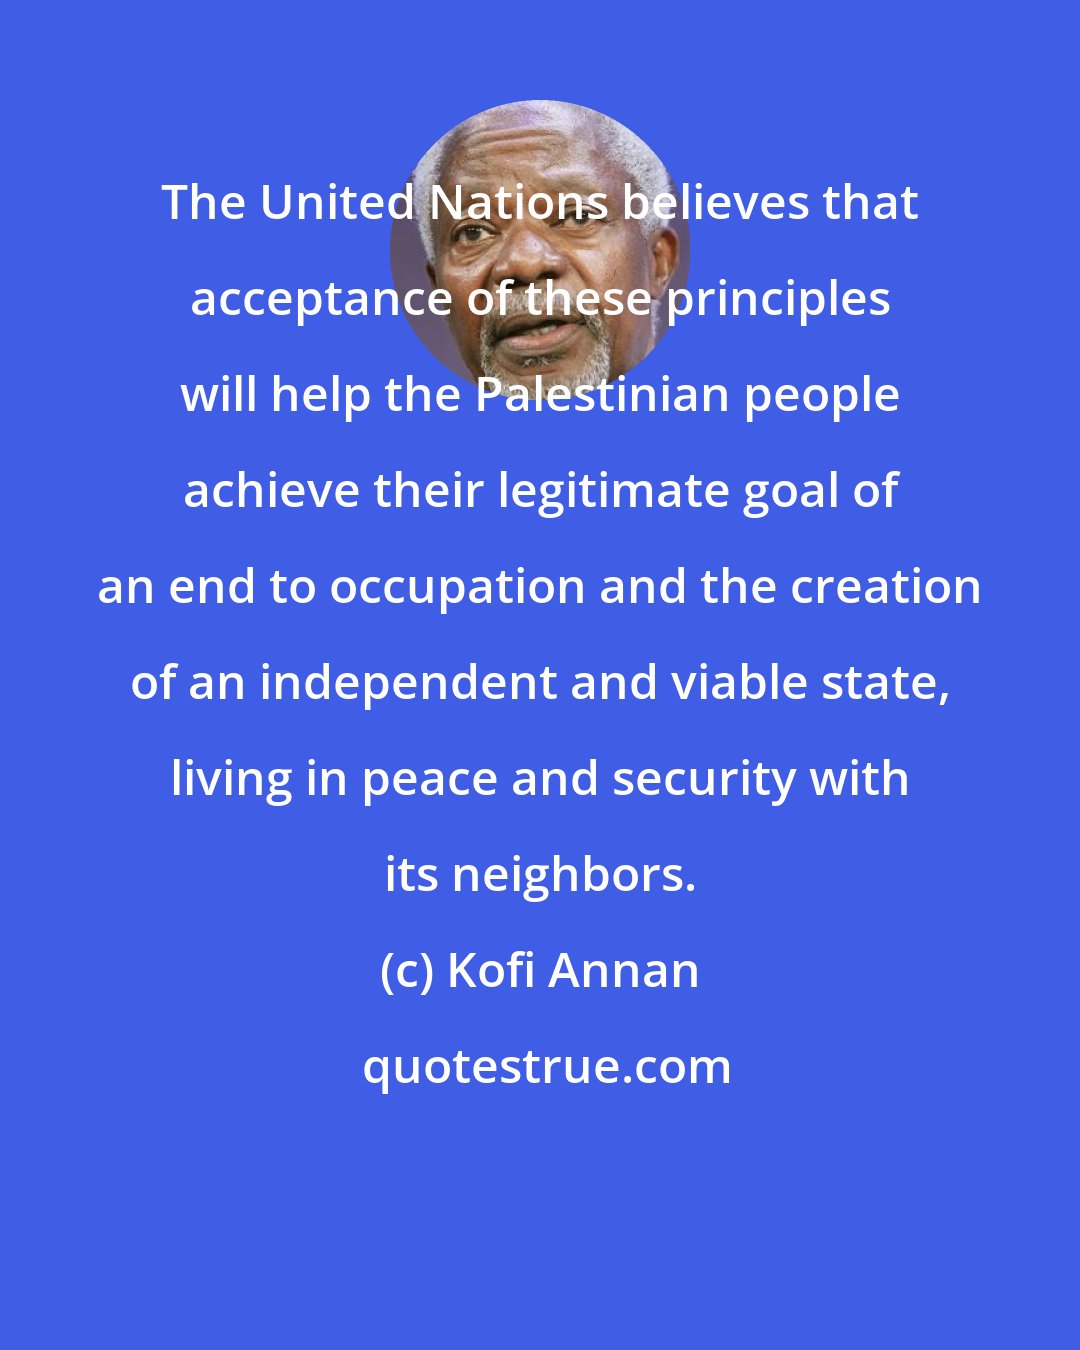 Kofi Annan: The United Nations believes that acceptance of these principles will help the Palestinian people achieve their legitimate goal of an end to occupation and the creation of an independent and viable state, living in peace and security with its neighbors.